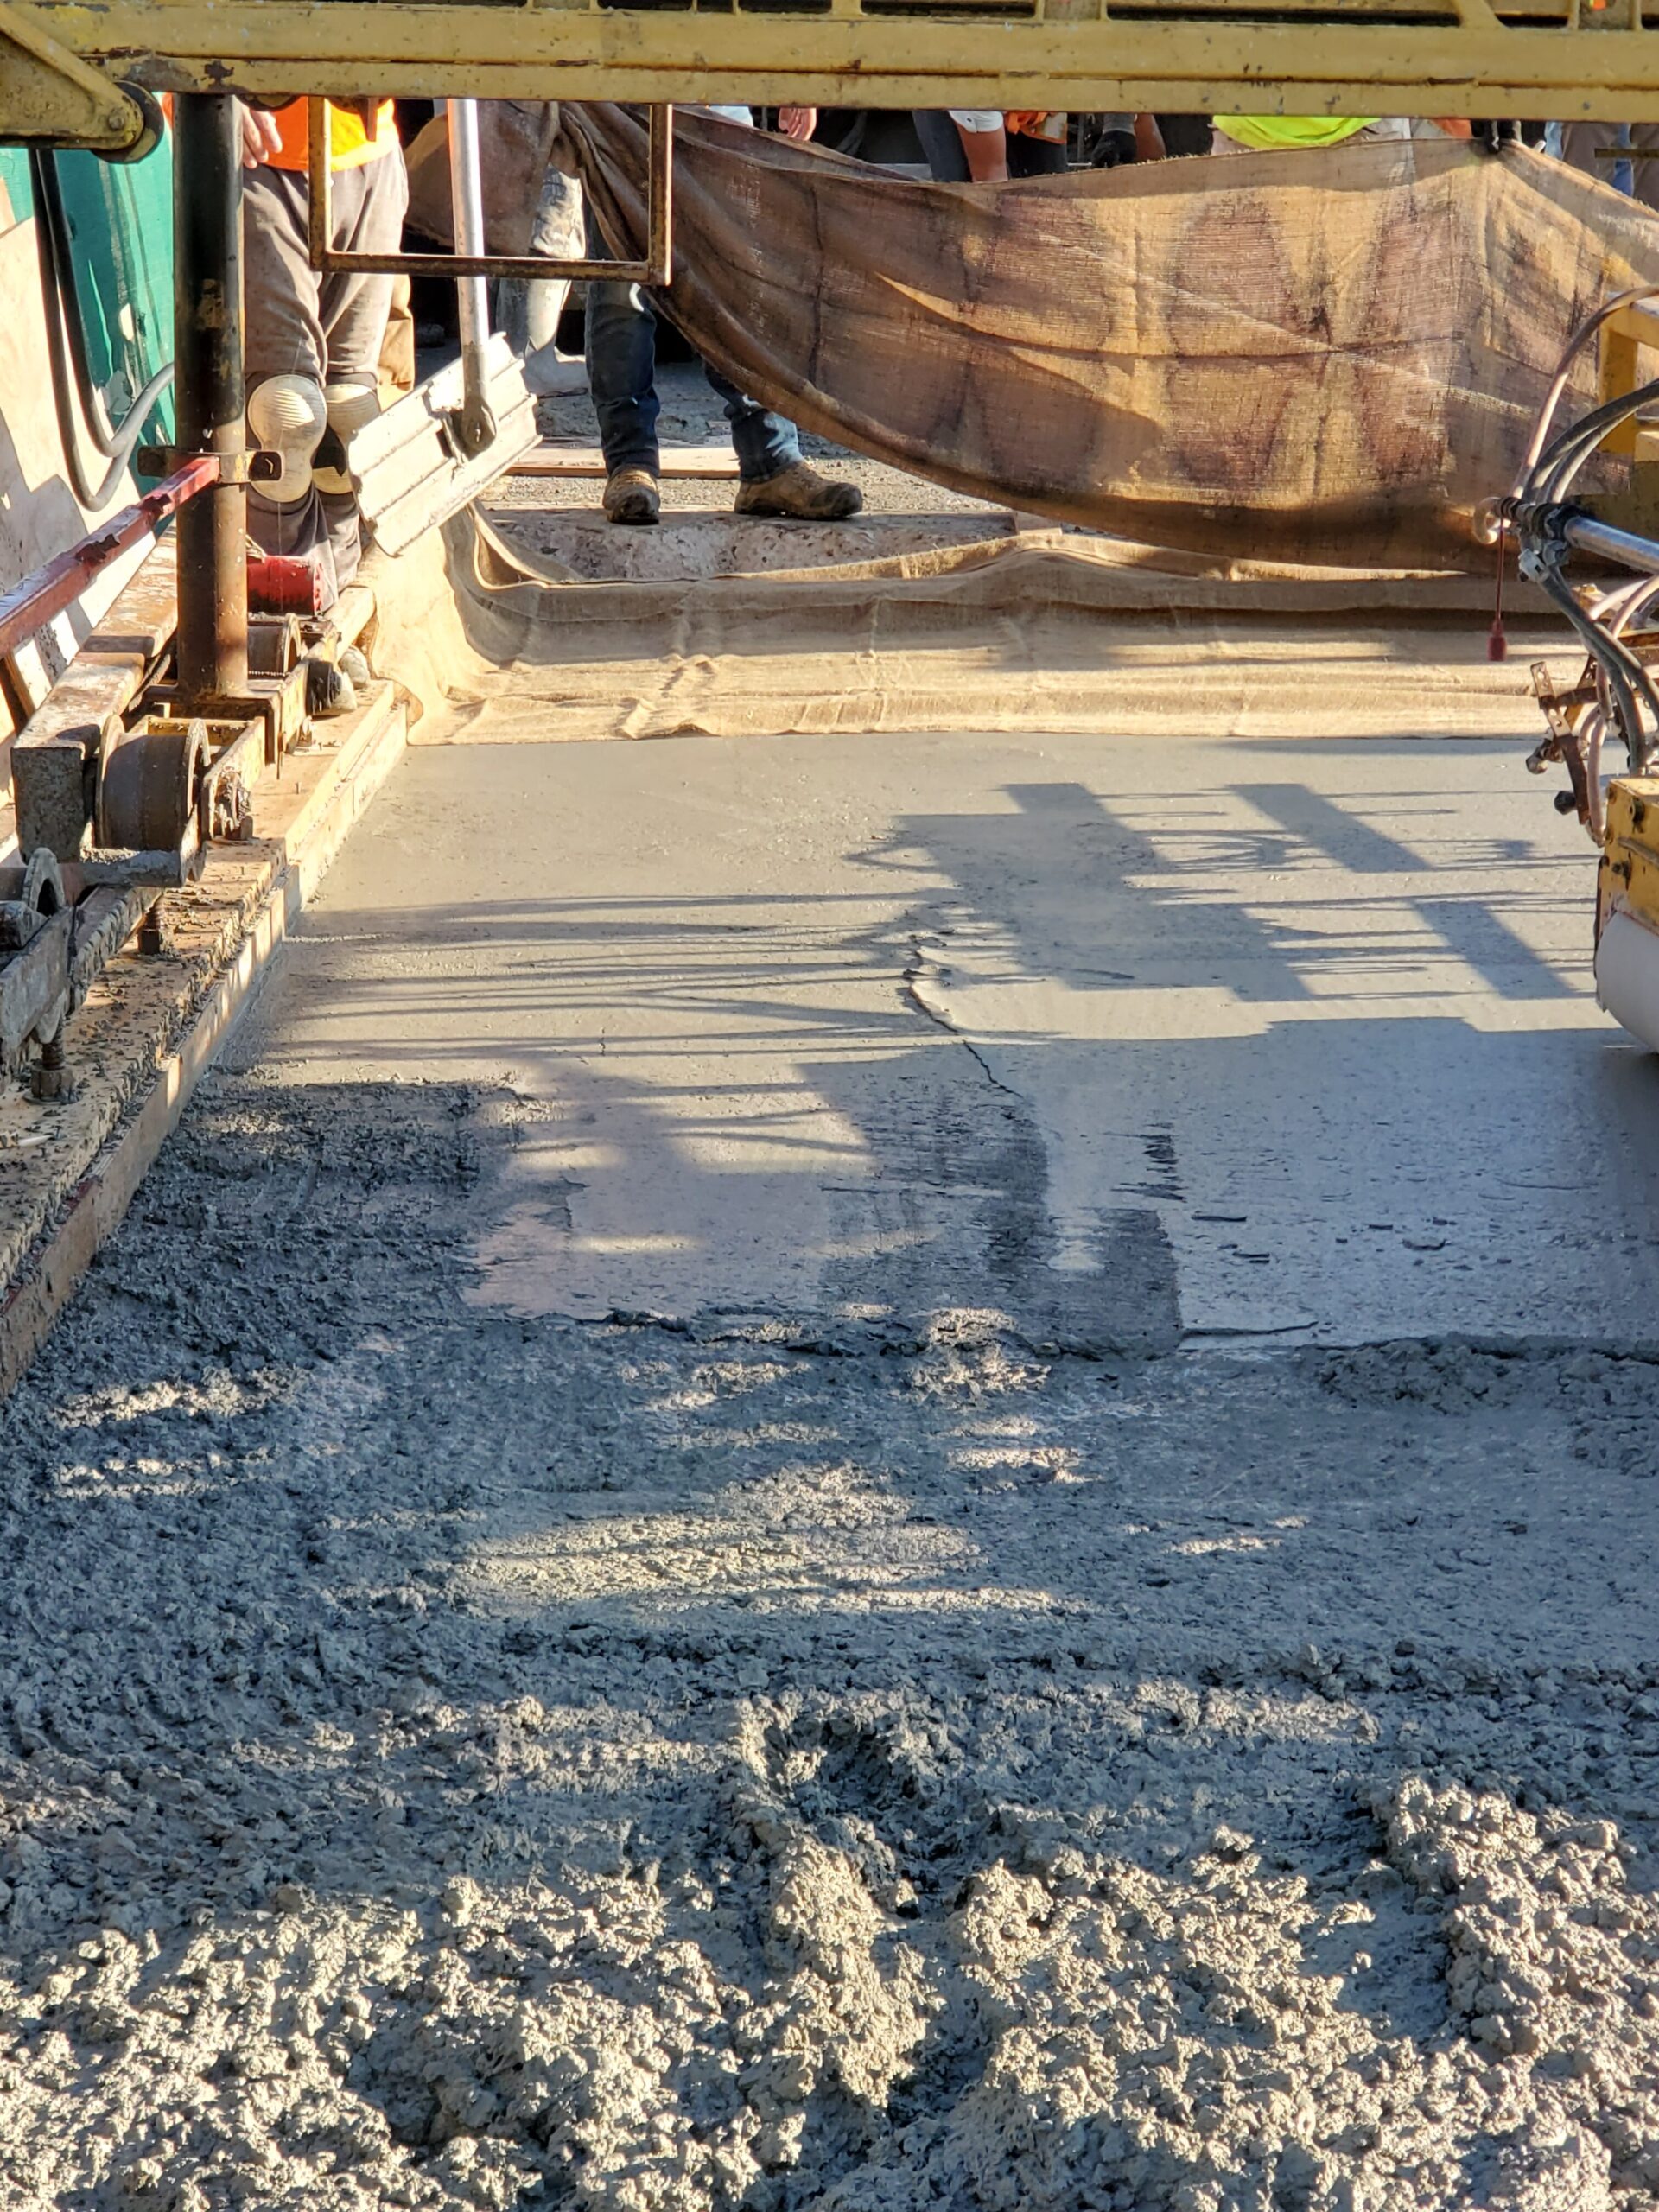 Wet burlap being placed on the fresh concrete